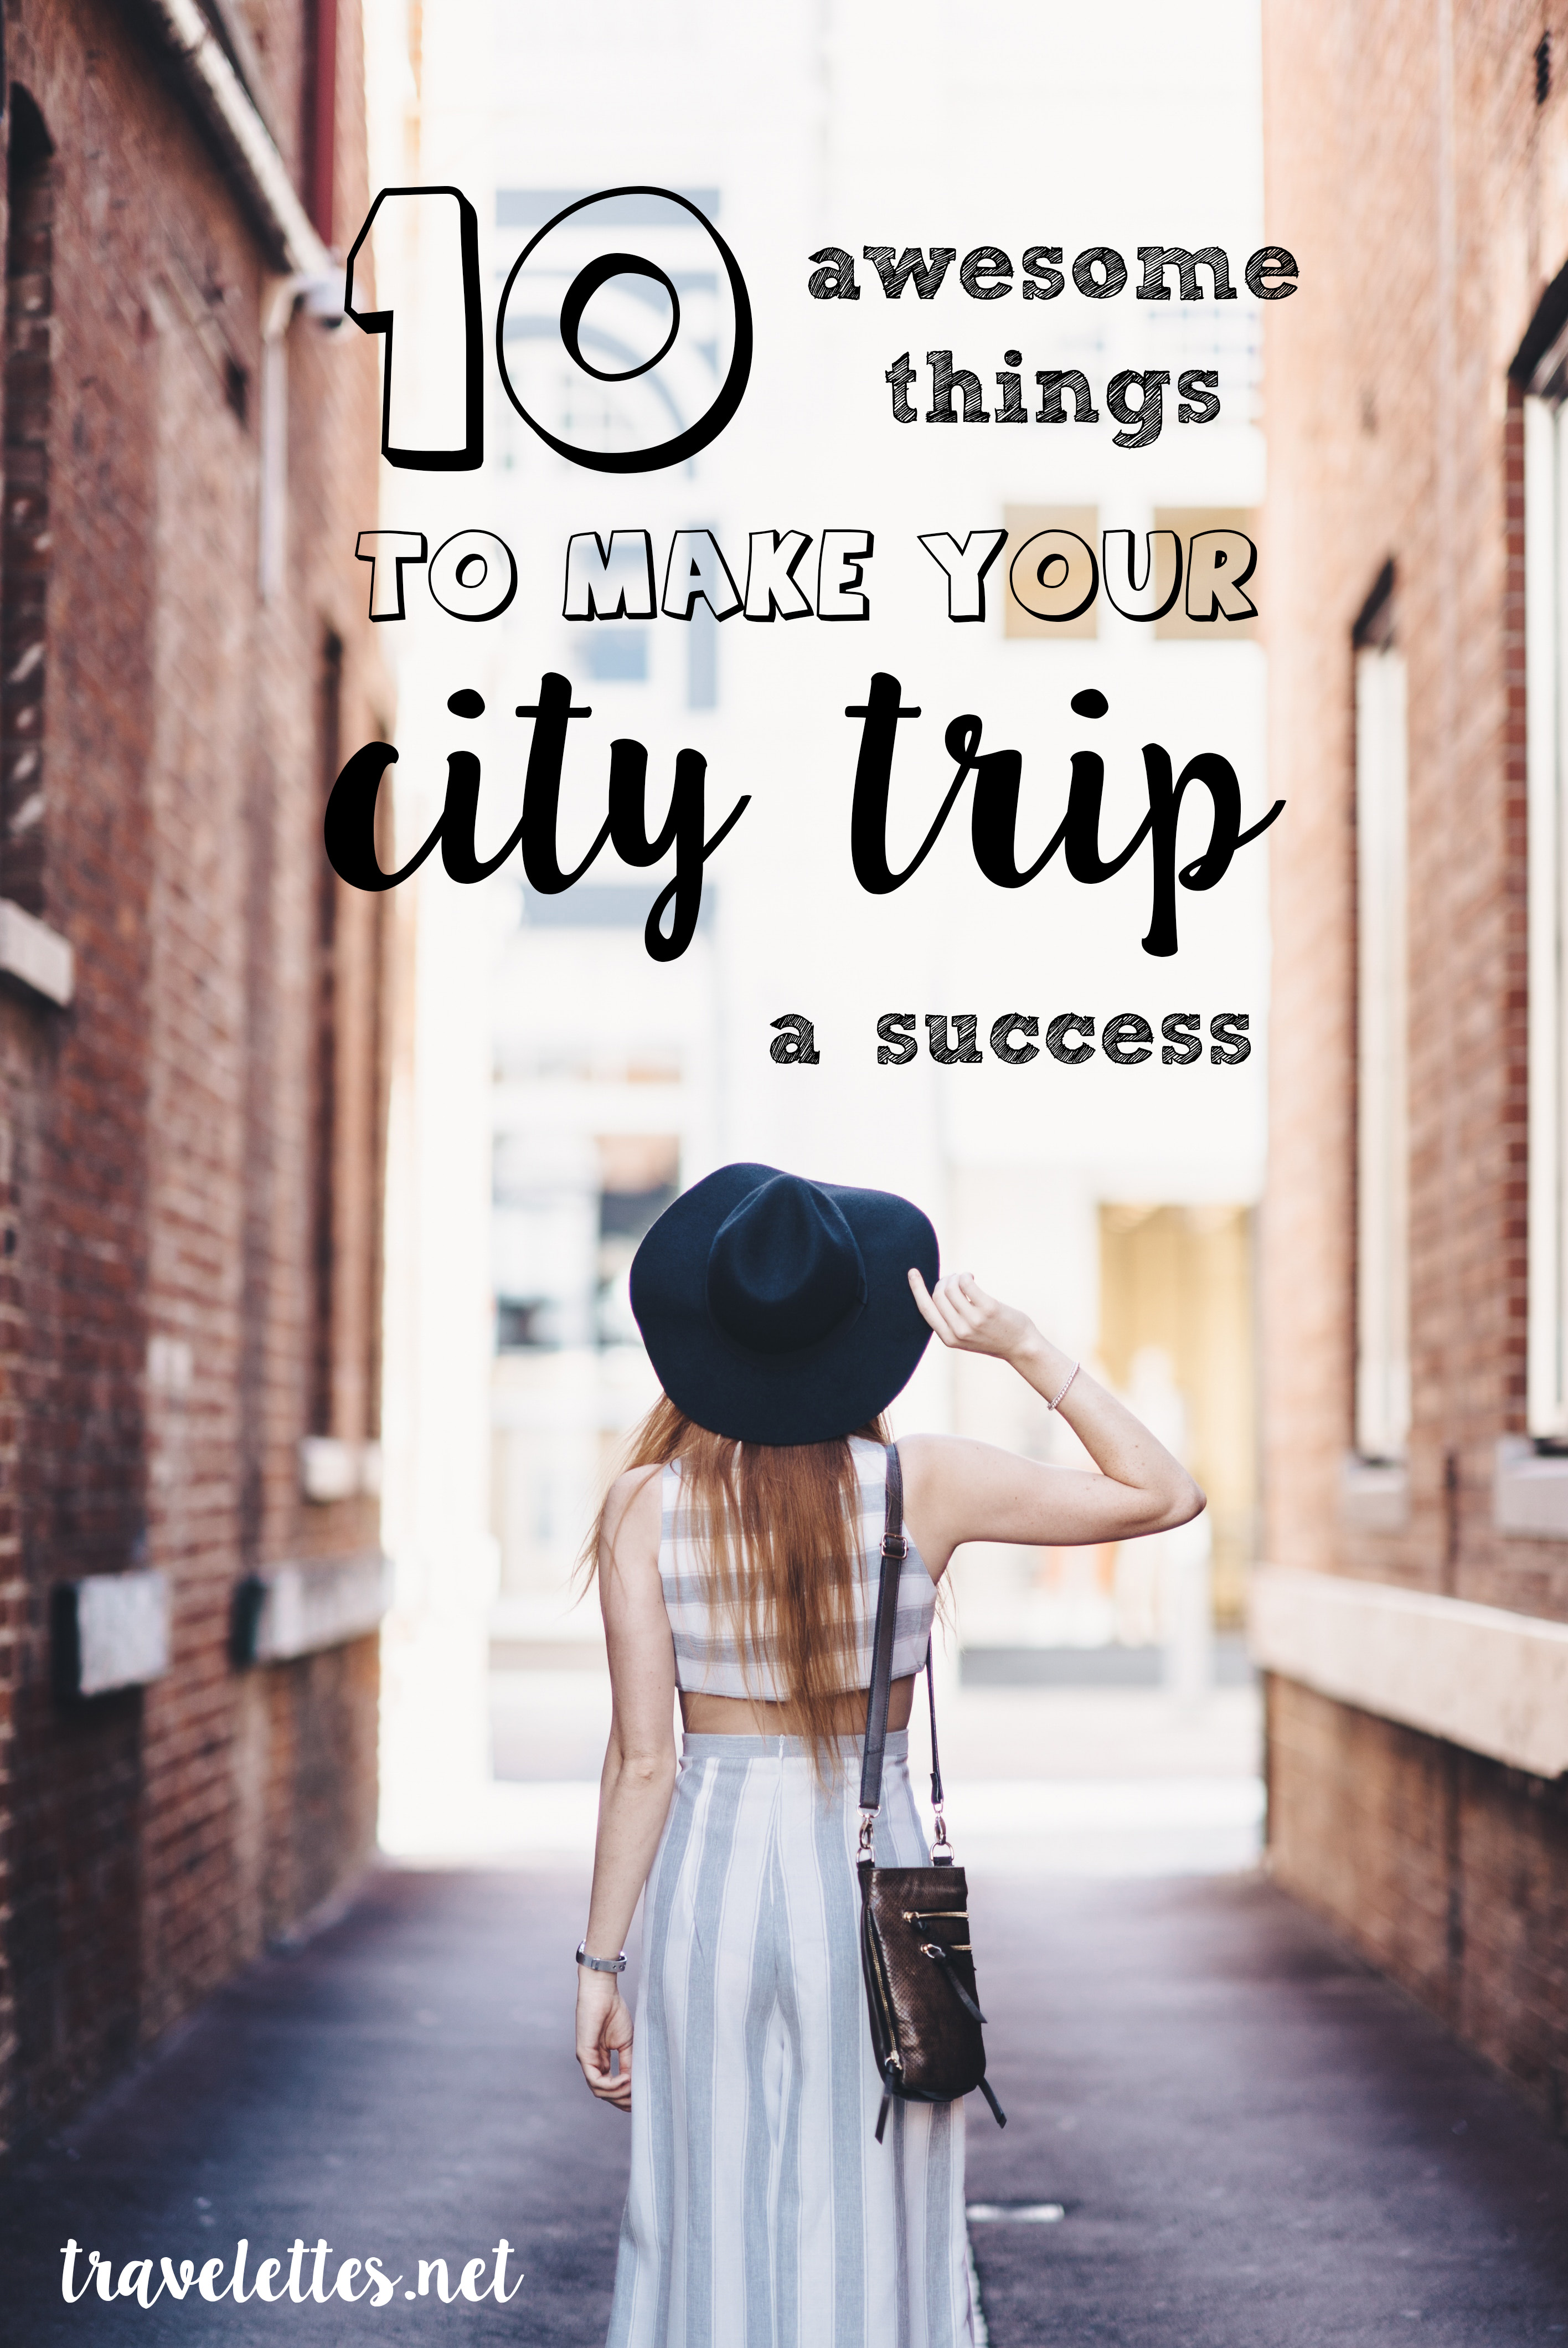 10 awesome things to make your city trip a success